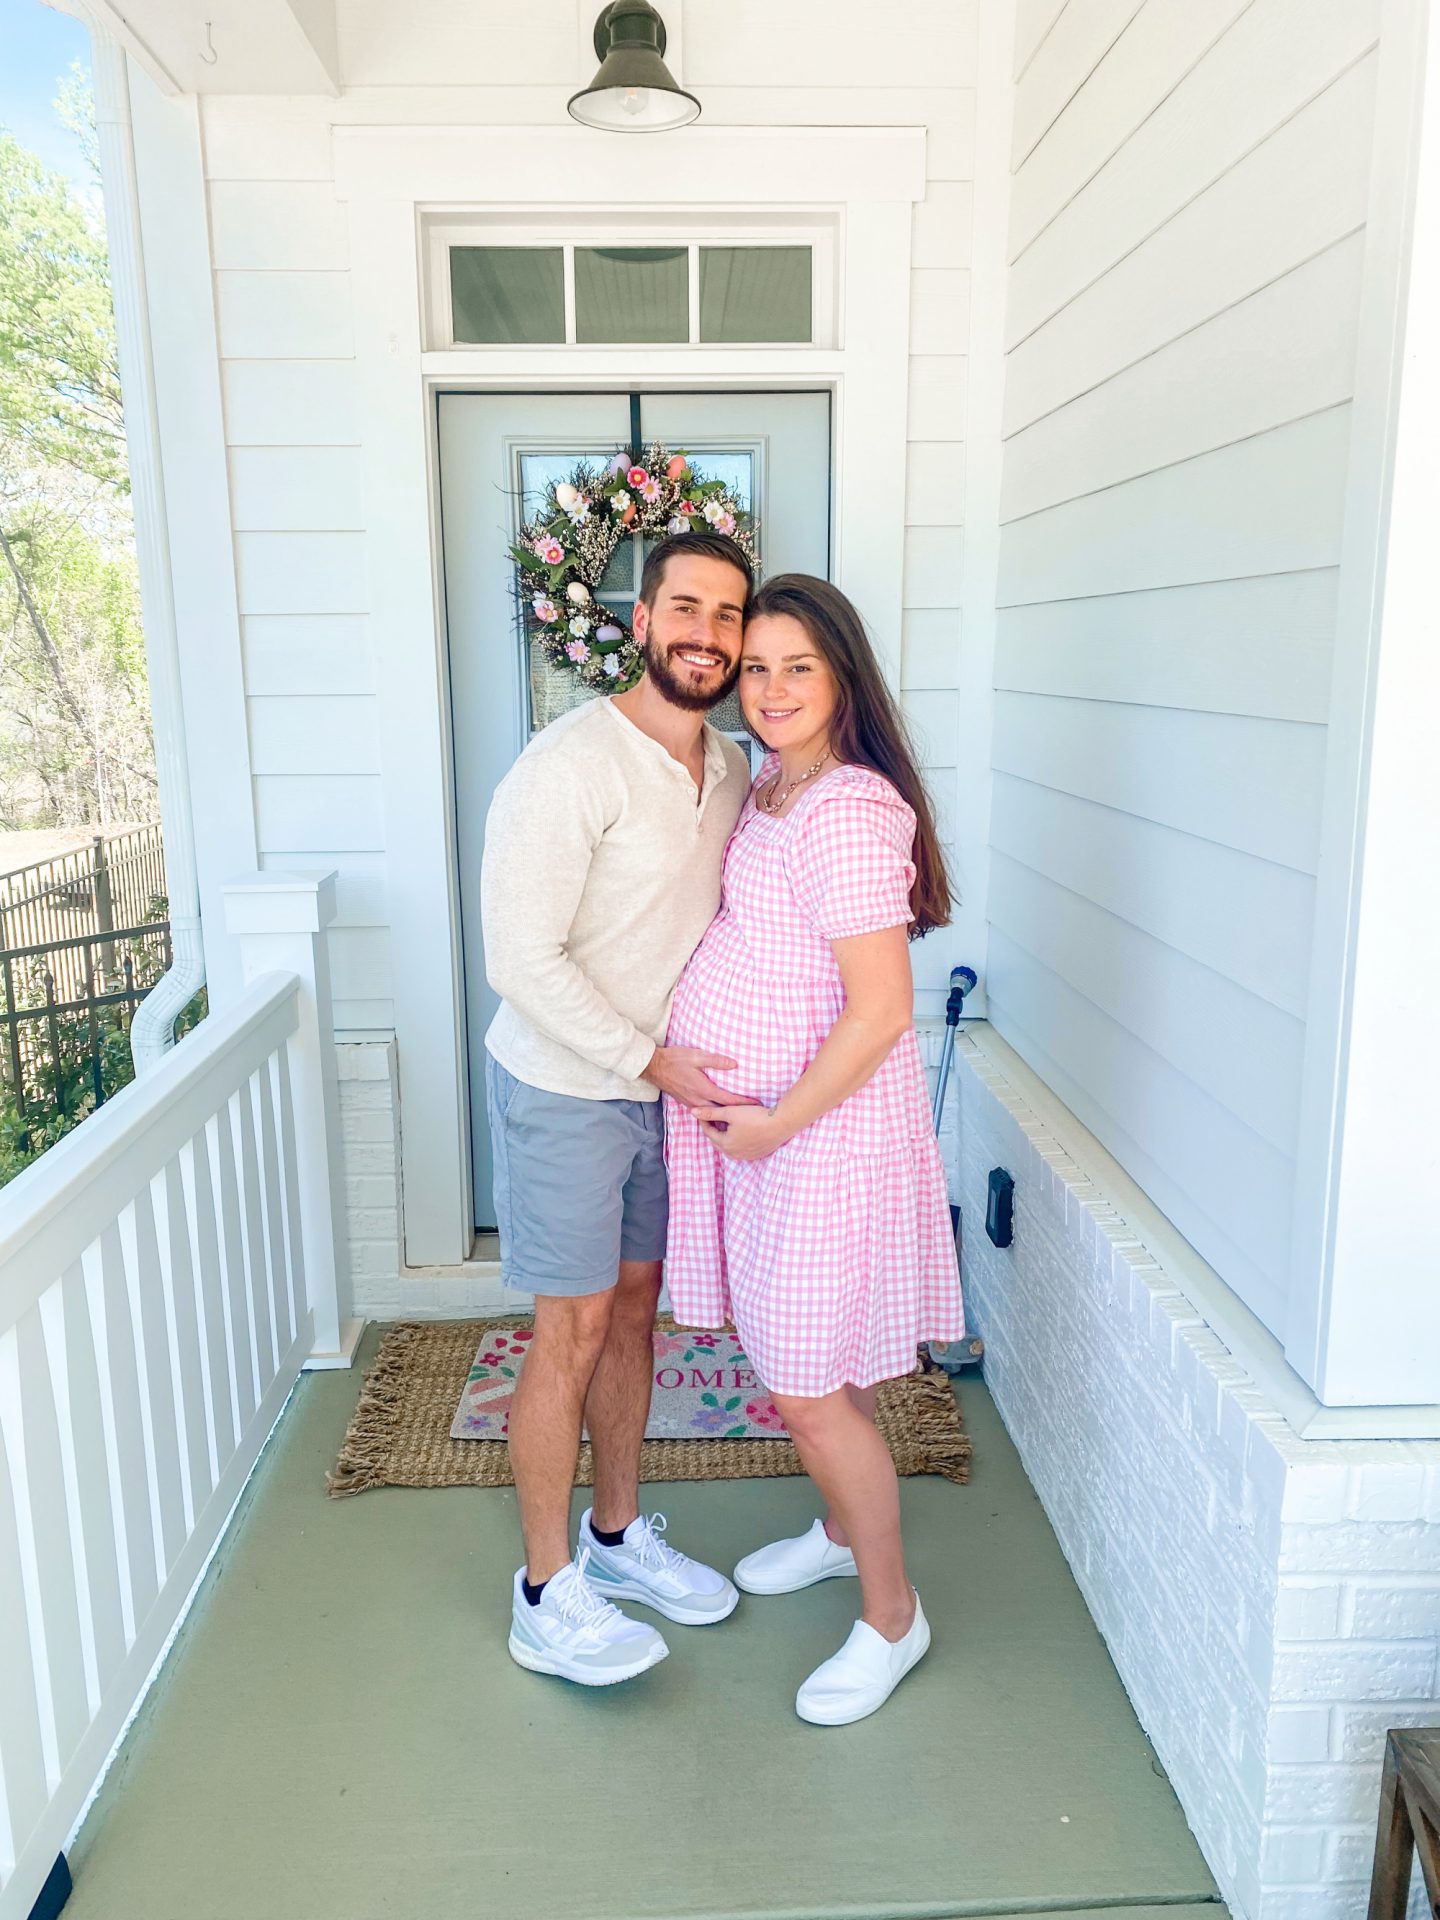 Easter, 9 months pregnant, nine months, family, beach lunch lounge dress, vionic beach shoes, easter recap blog, lifestyle, blogger, day in the life, weekly recap, easter food, carrot cake lifestyle, fort mill, South Carolina, blogger